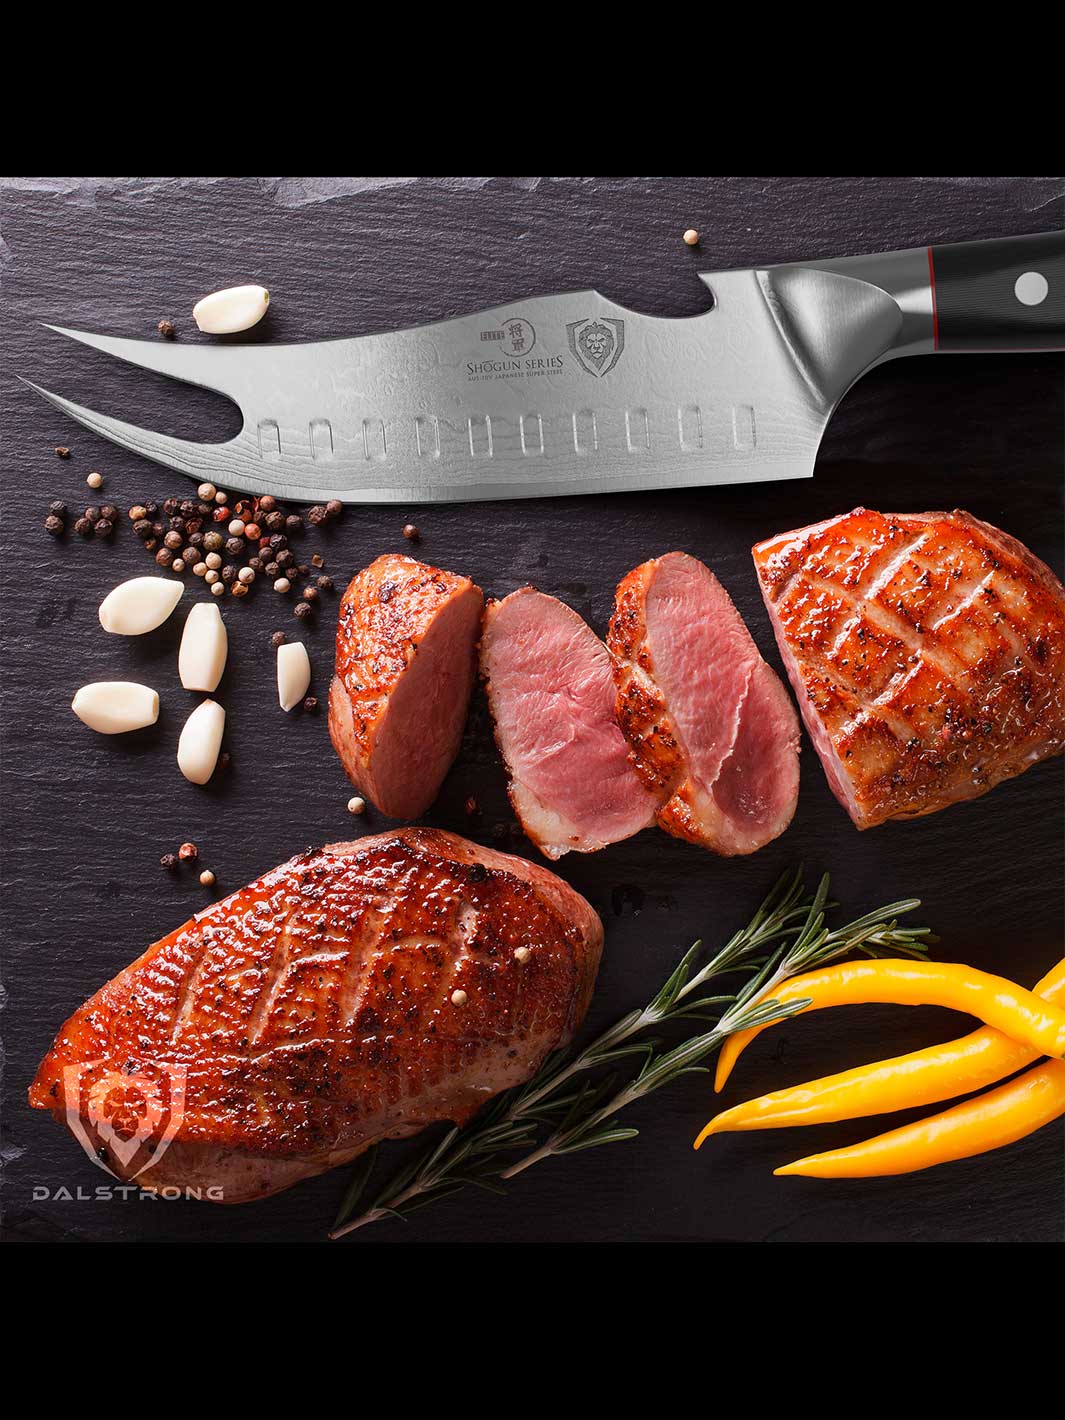 Dalstrong shogun series 6.5 inch pitmaster knife with black handle and sliced duck meat on the bottom.